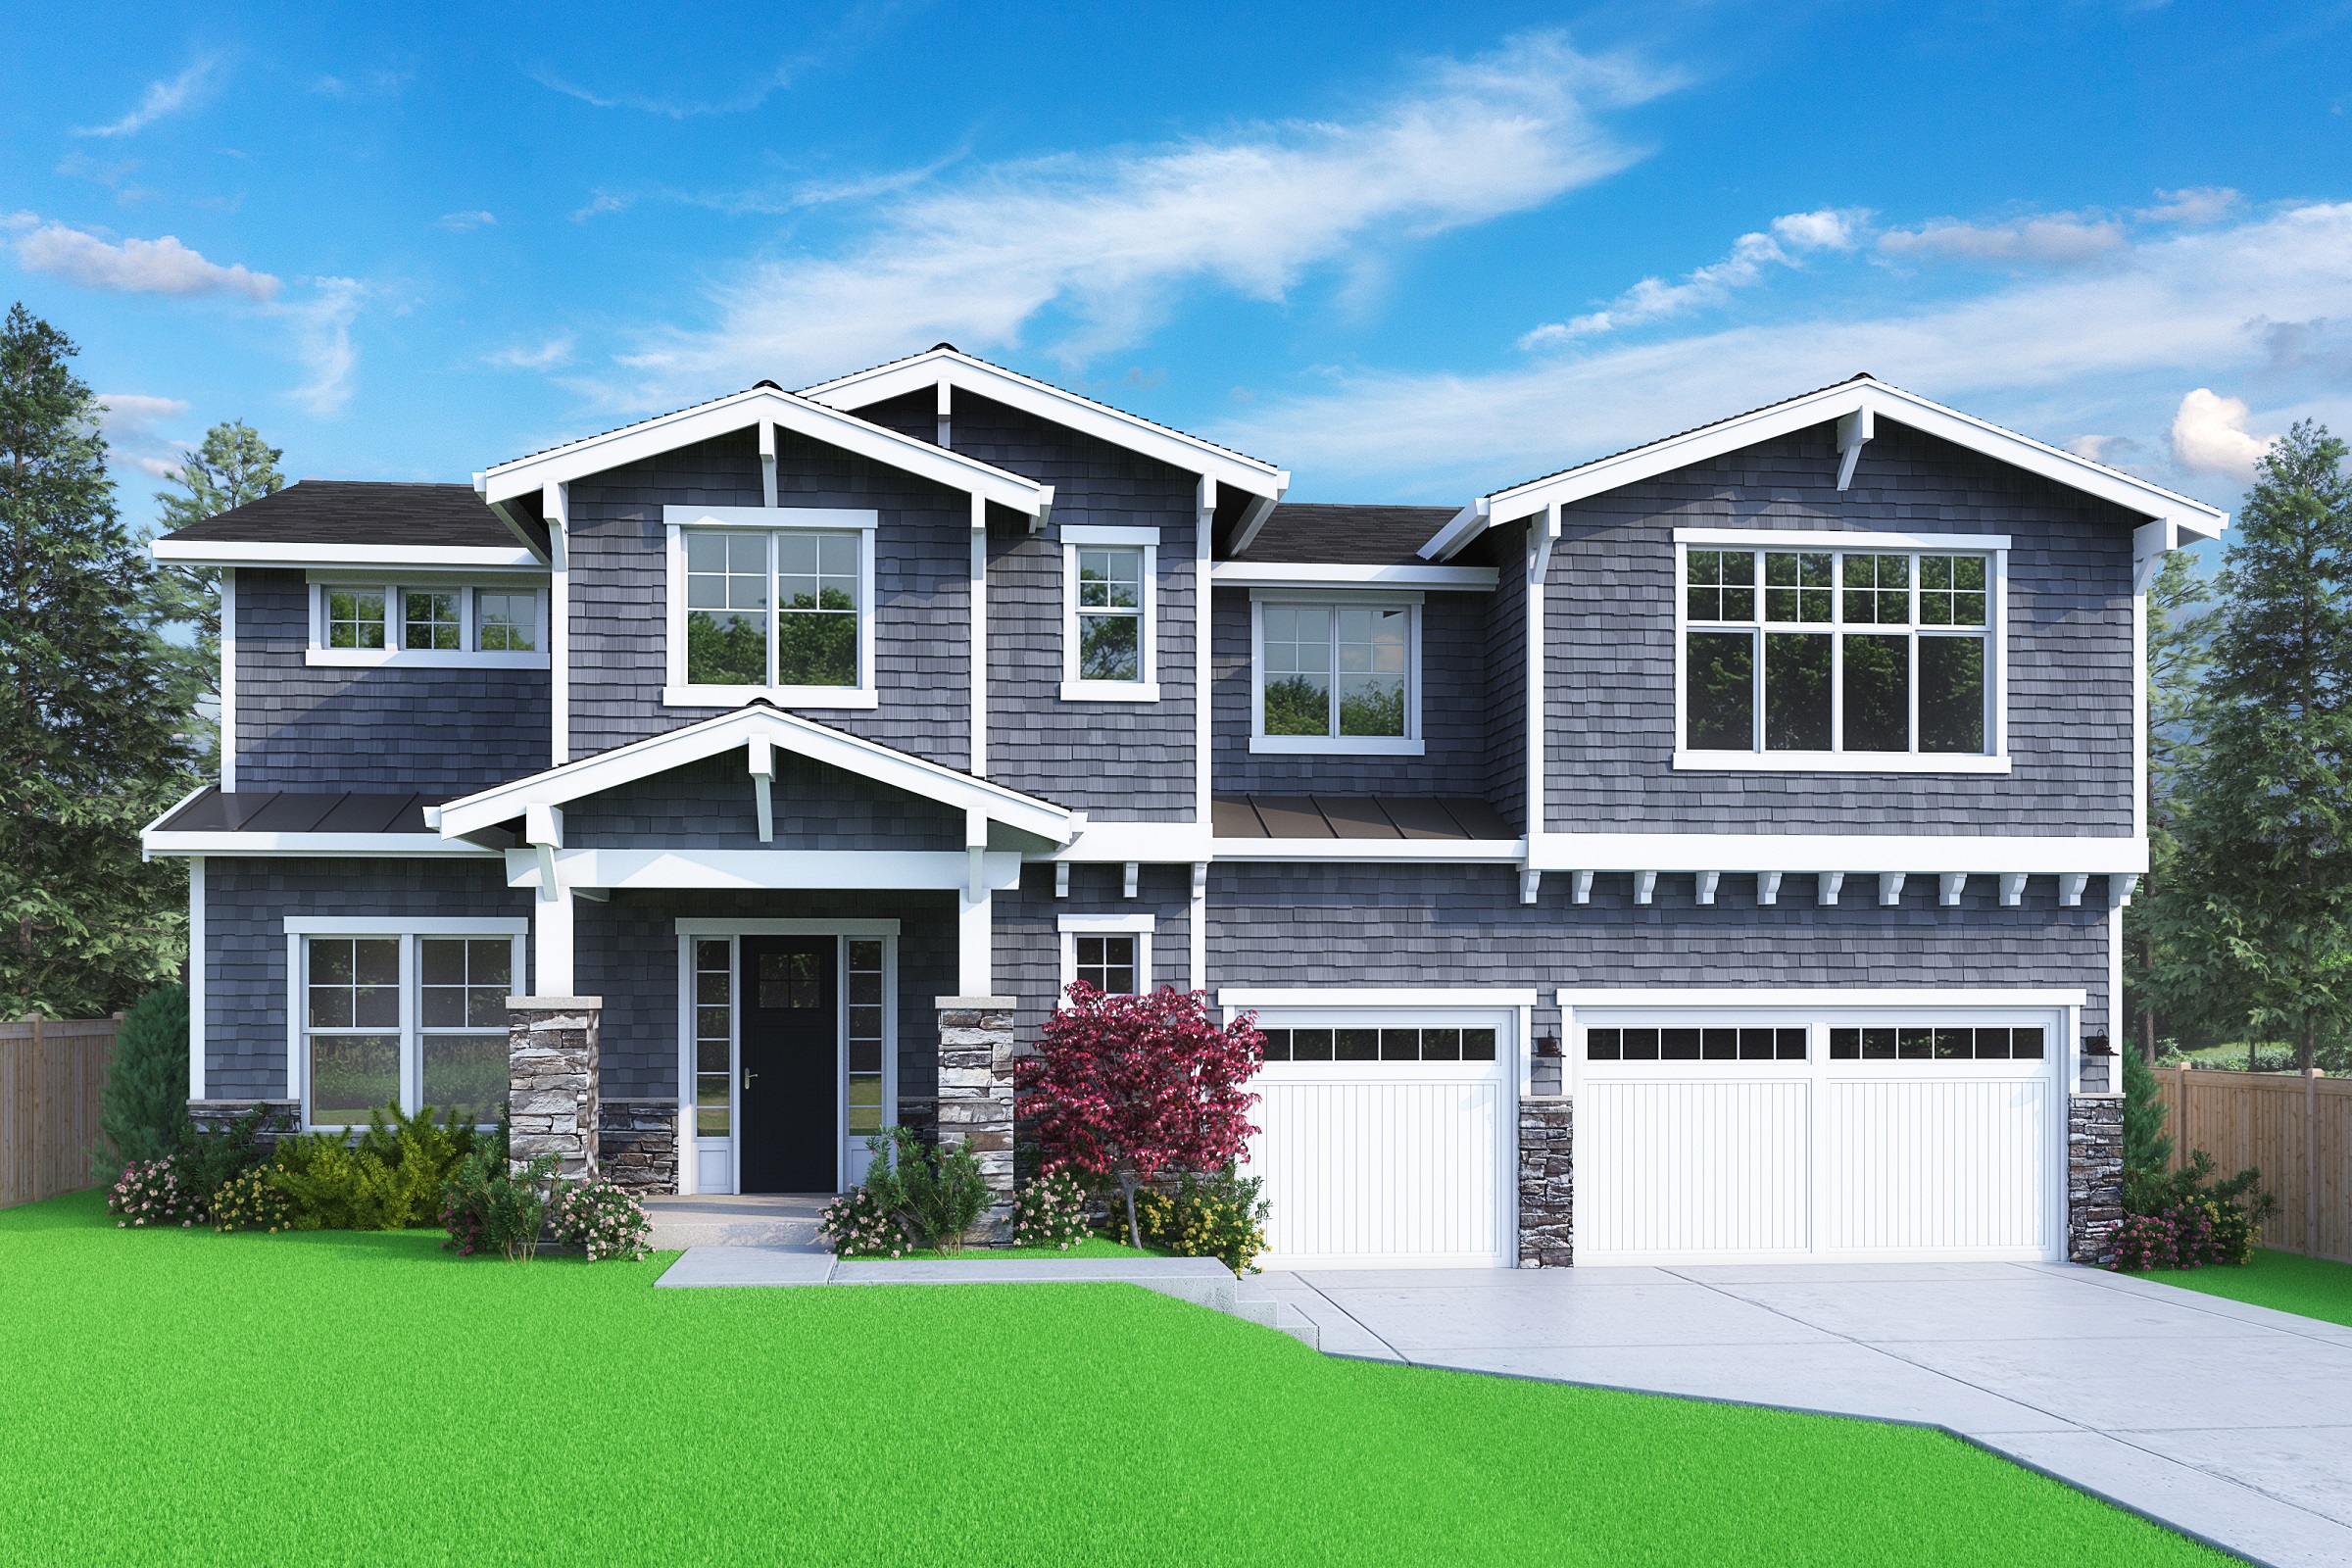 View our new luxury home construction on 14732 SE Eastgate Dr-, in Bellevue, WA from MN Custom Homes